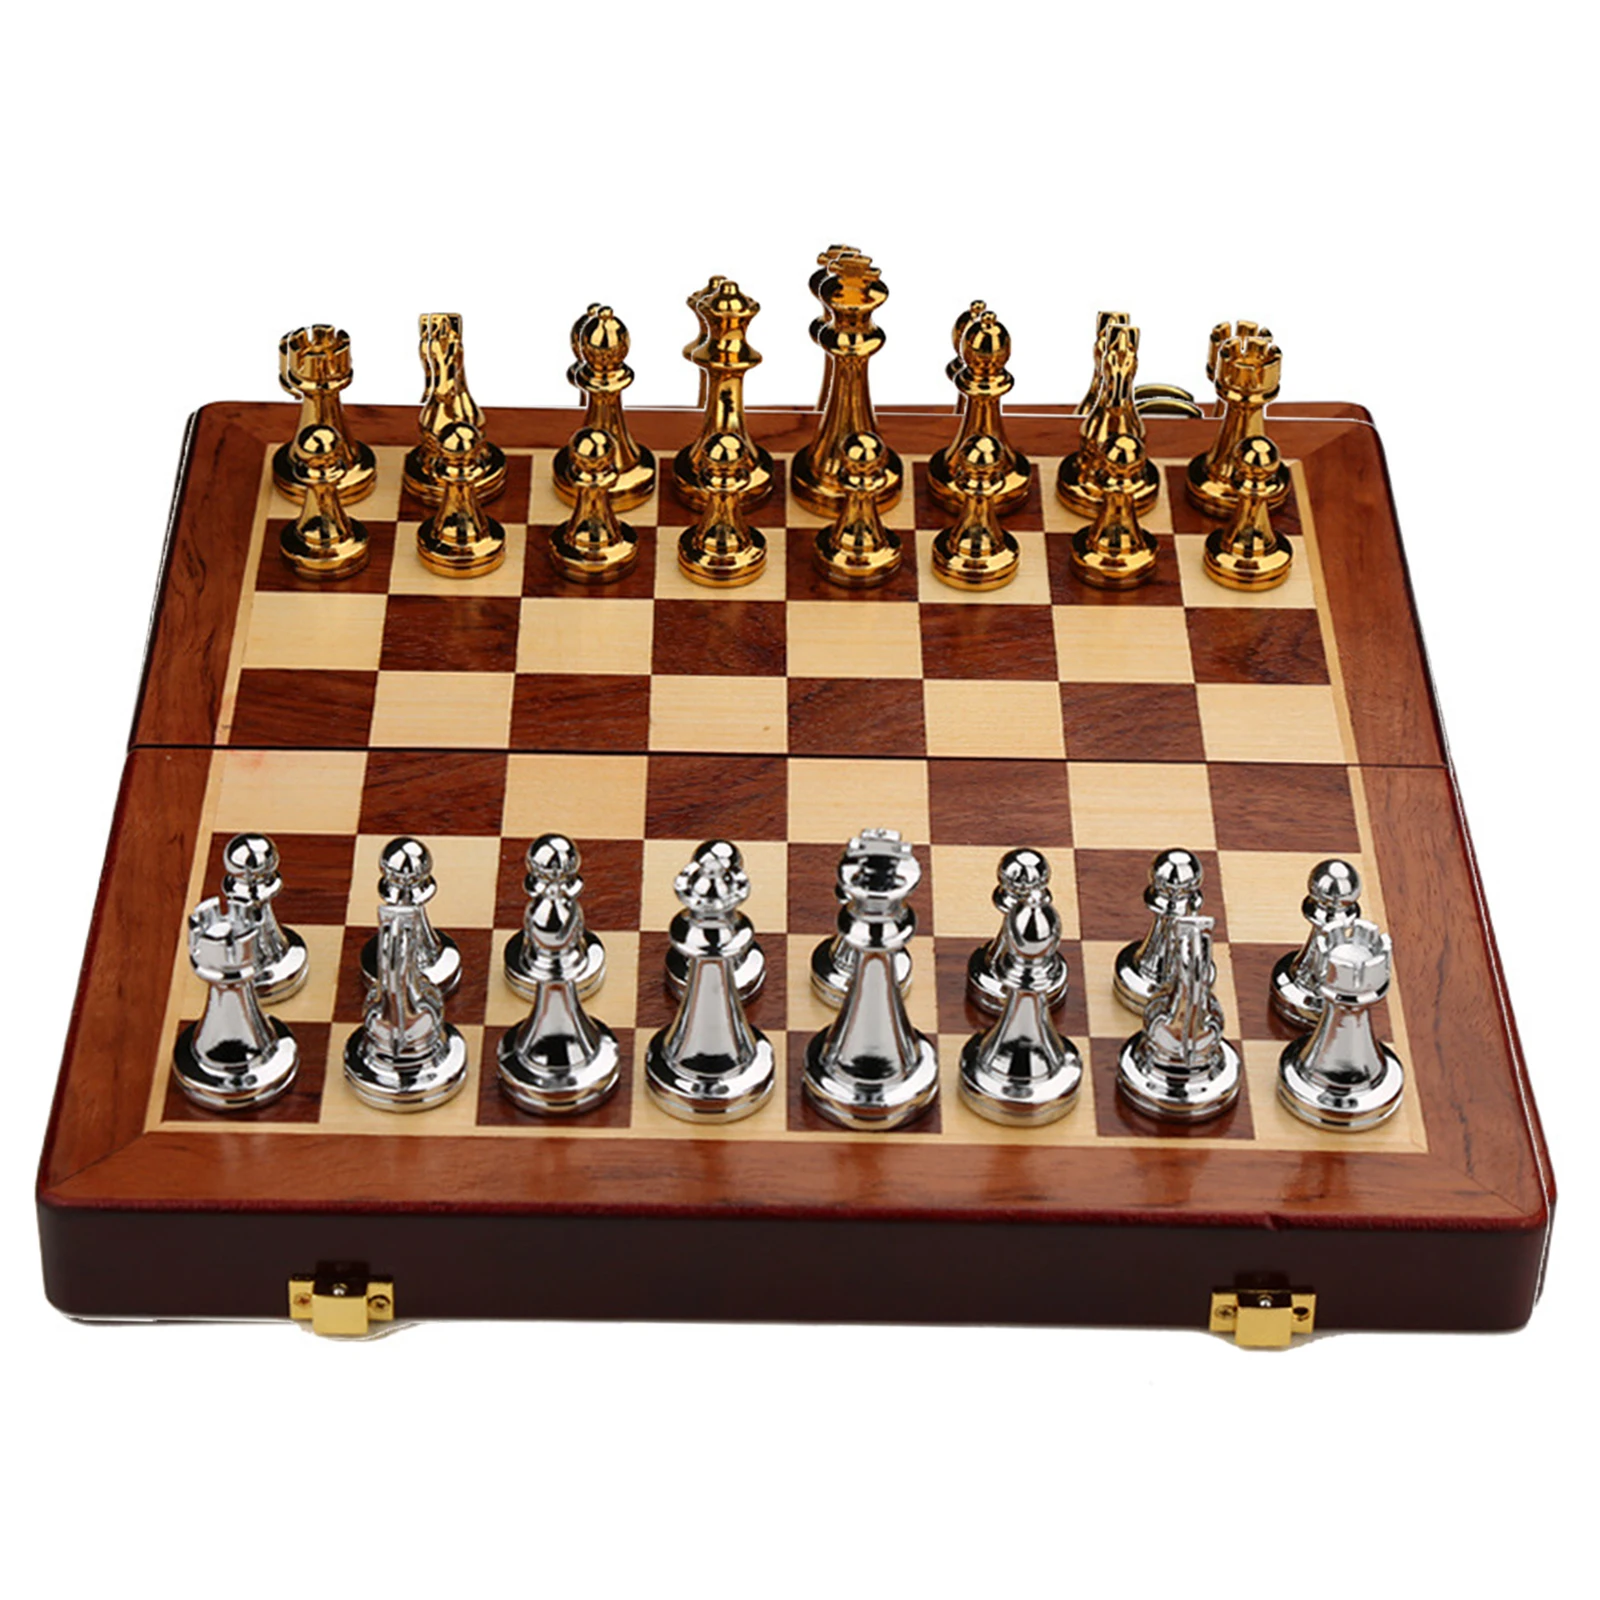 Medieval Chess Set With High Quality Chessboard 32 Pieces Magnetic